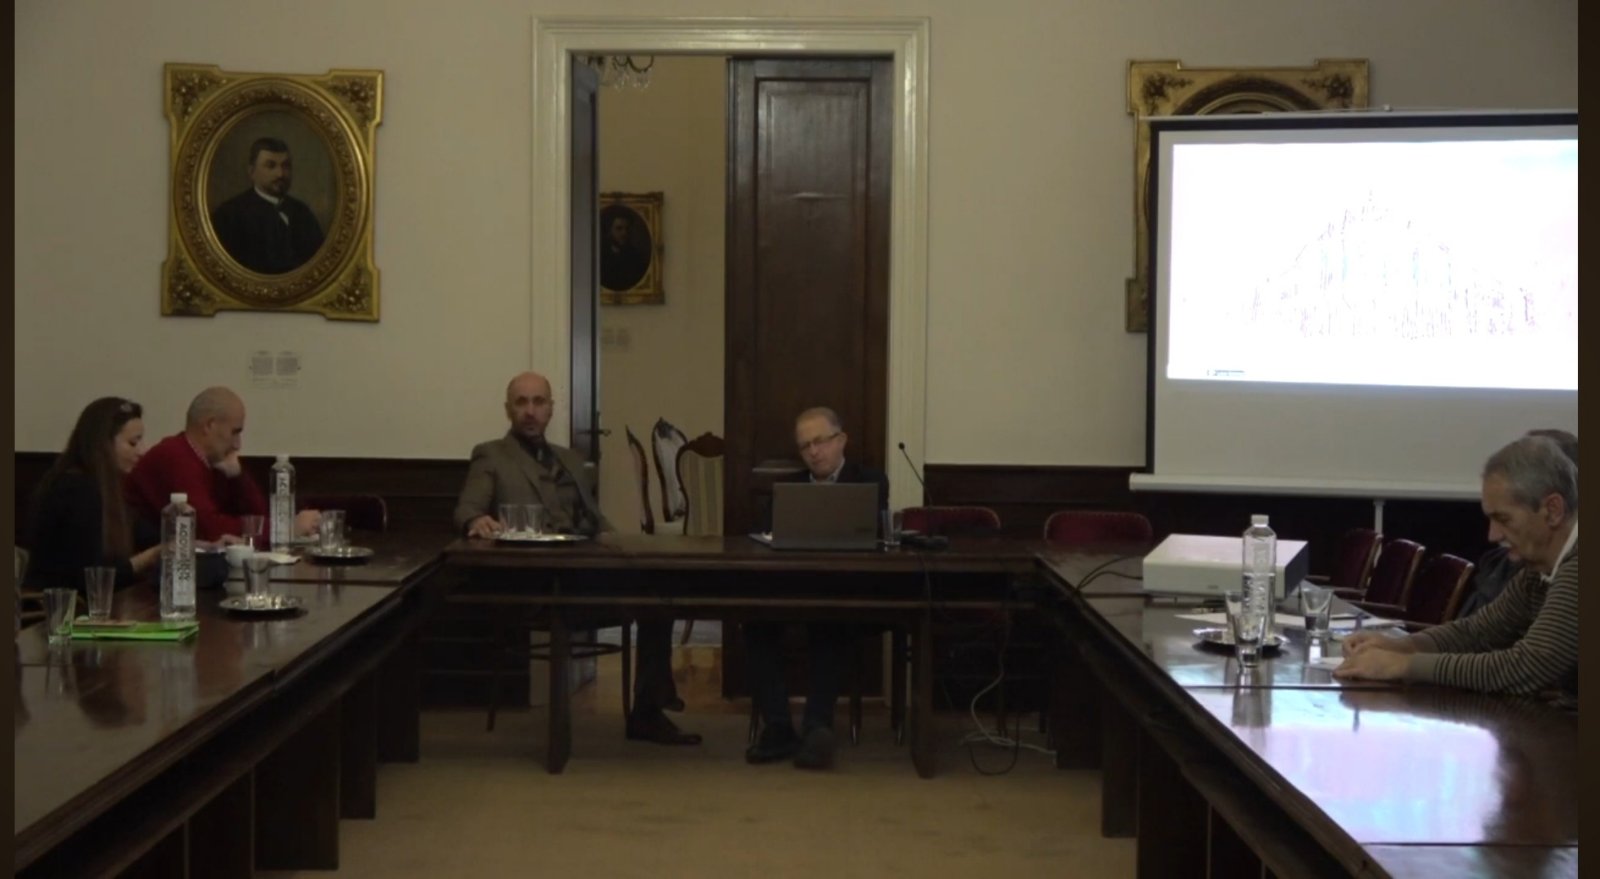 Mikonja Knežević, PhD, participated in the round table “Research of Serbian Philosophy in History and Contemporaneity”